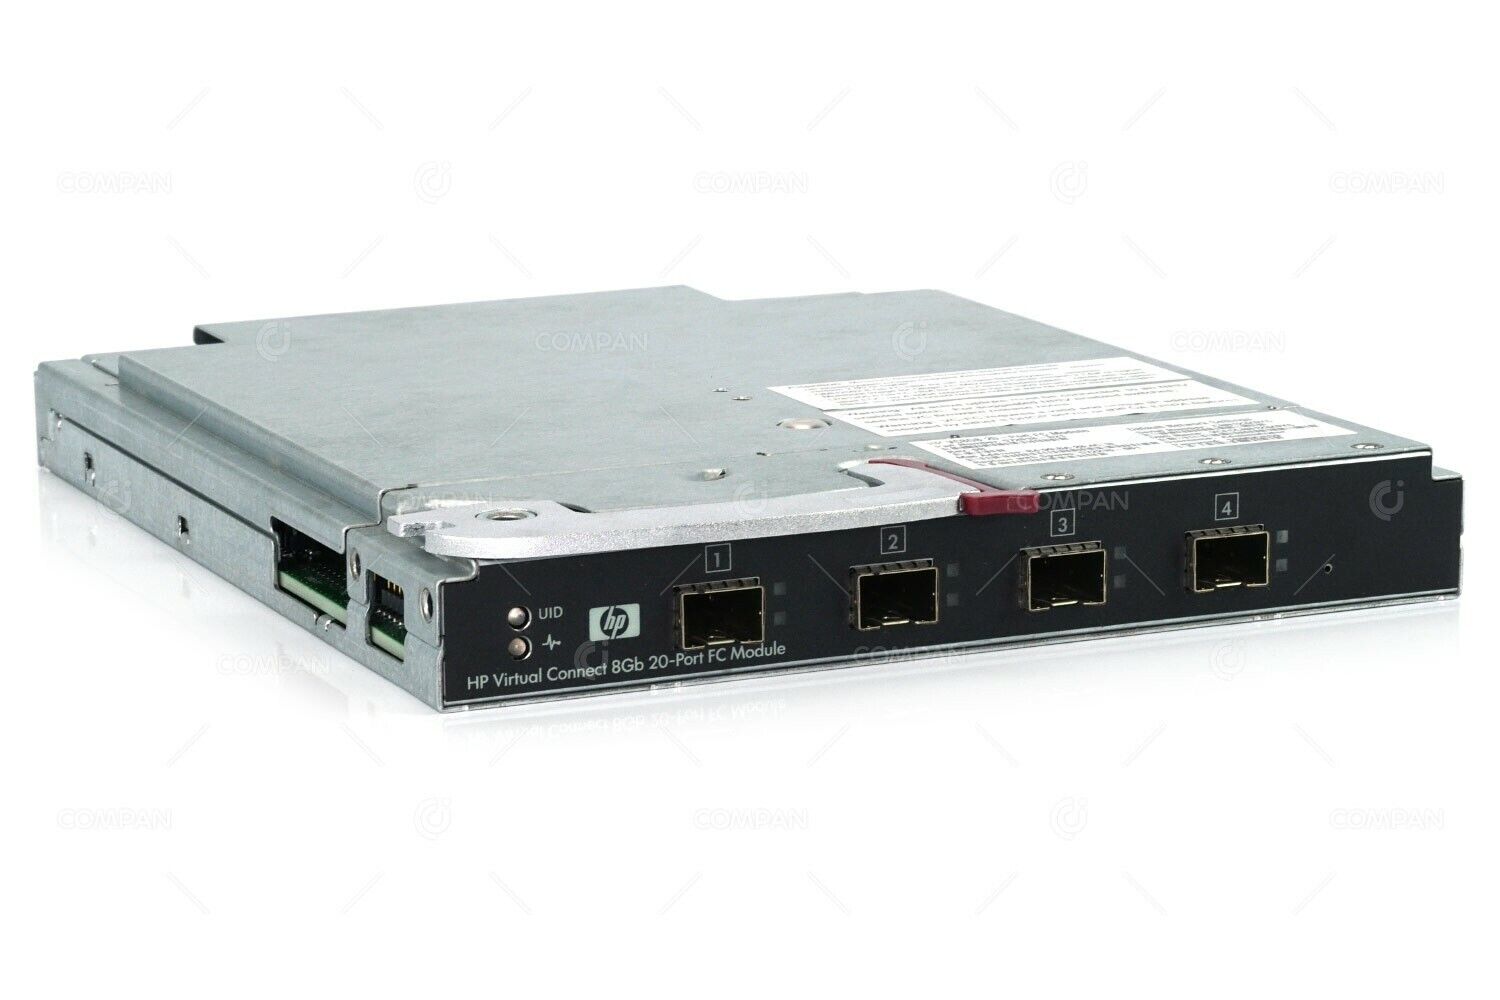 Cheap mail Tampa Mall order shopping 572216-001 HP VIRTUAL CONNECT 8GB MODULE CHANNEL 20-PORT FIBRE